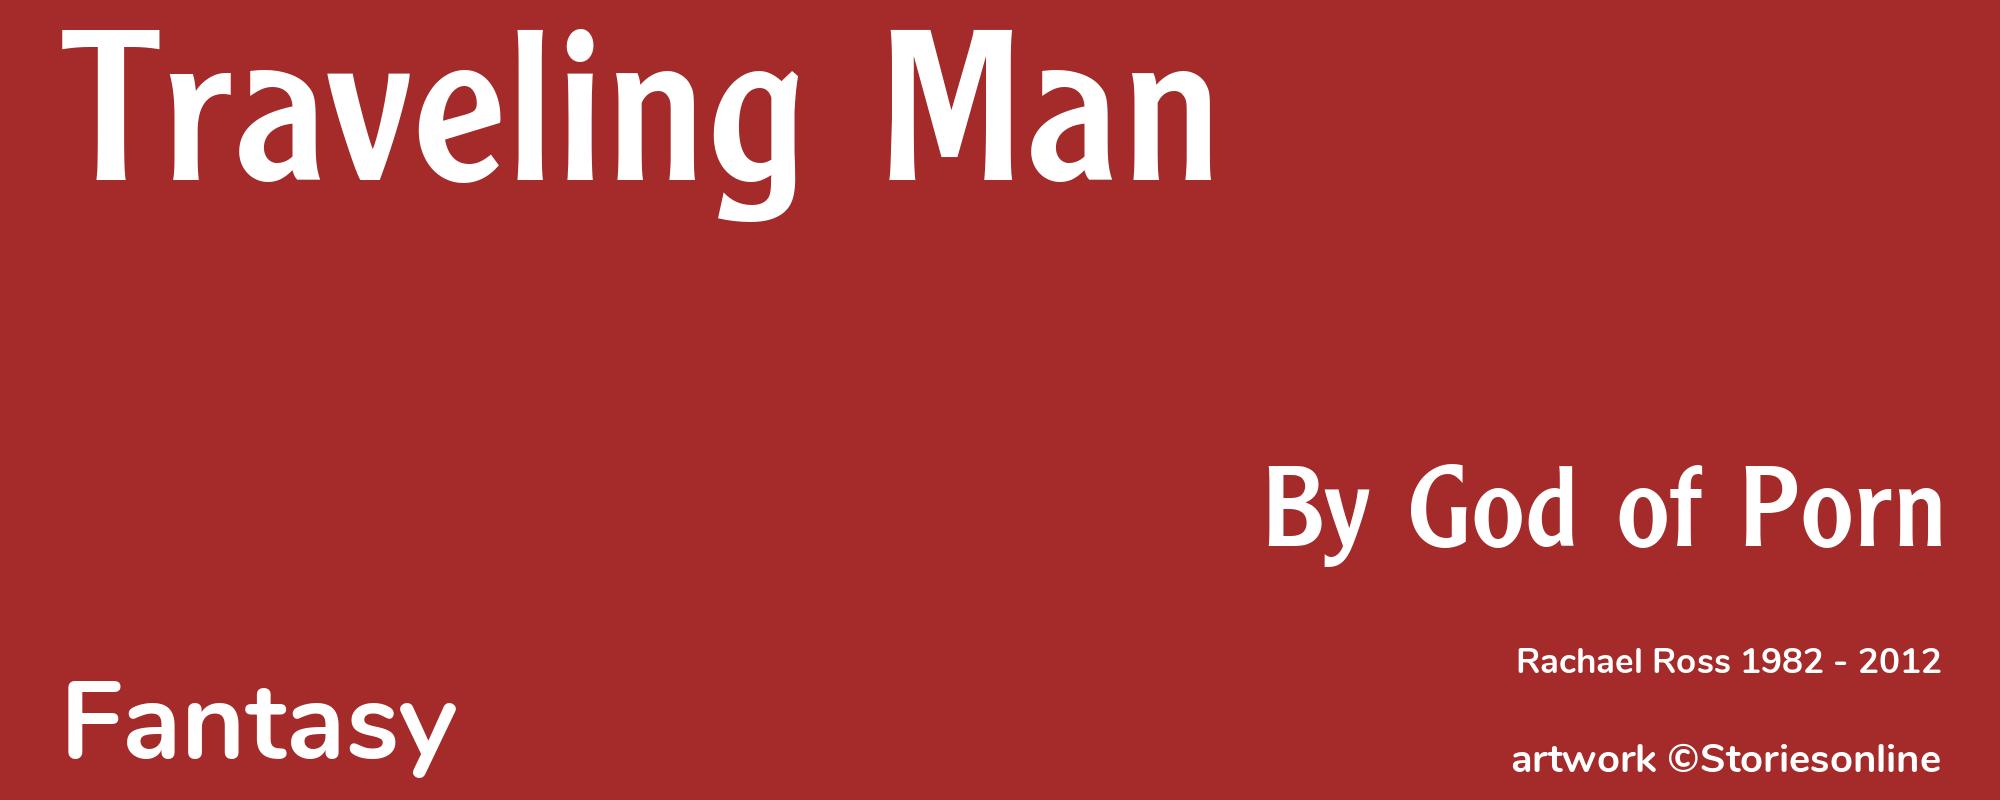 Traveling Man - Cover